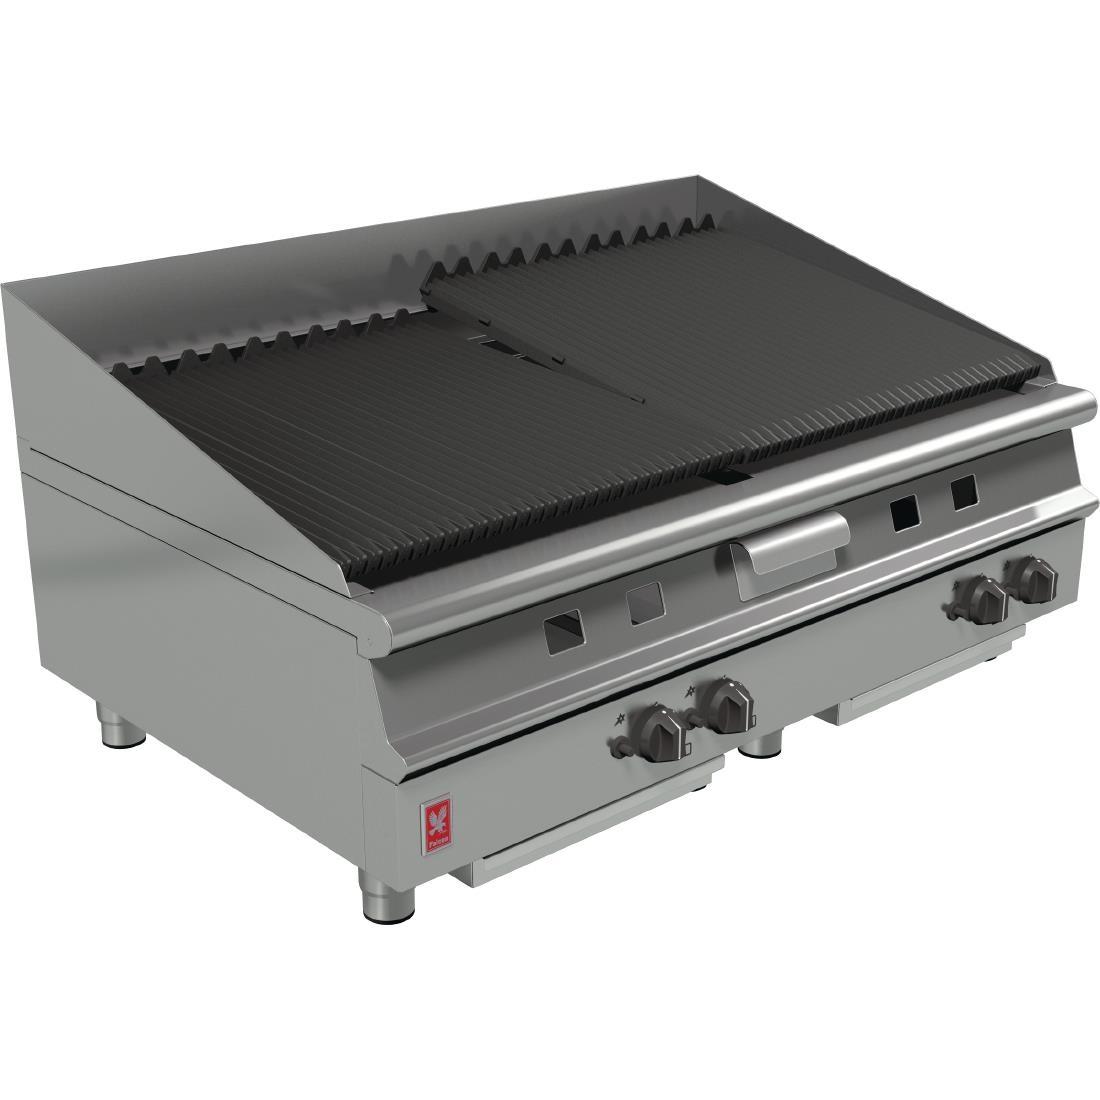 Falcon Dominator Plus Natural Gas Chargrill G31225 - GP029-N  - 1